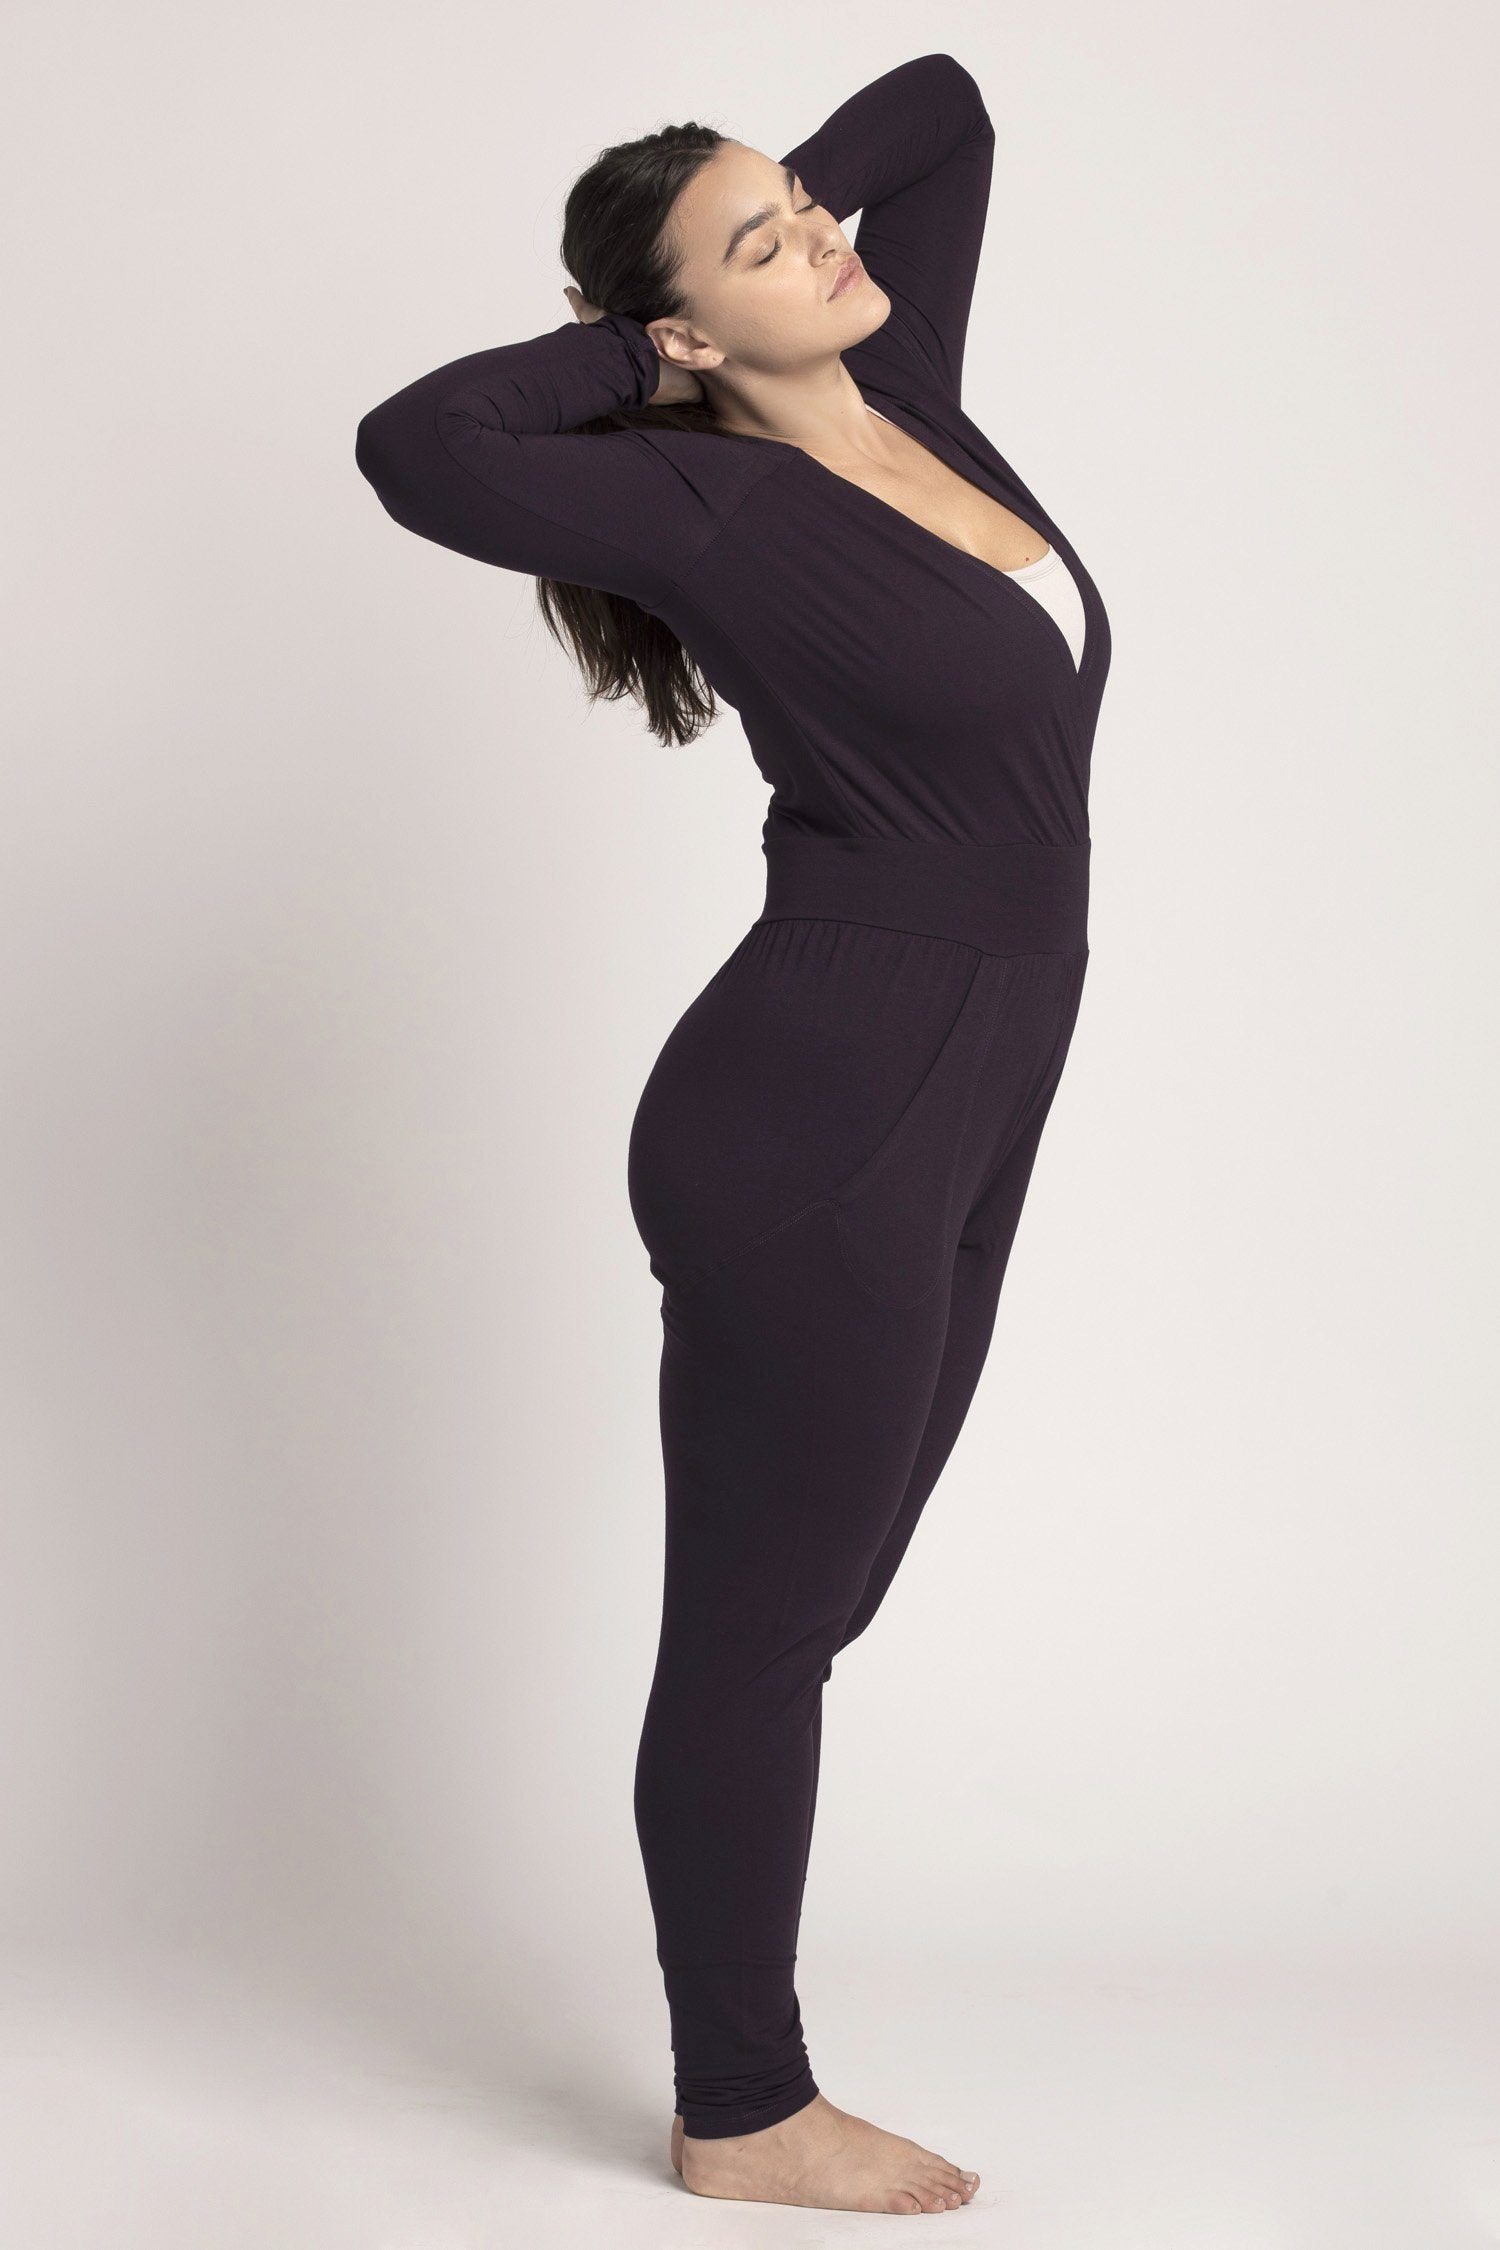 Ripple Yoga Wear Jumpsuit - Size Small – Wild Rose Consignment